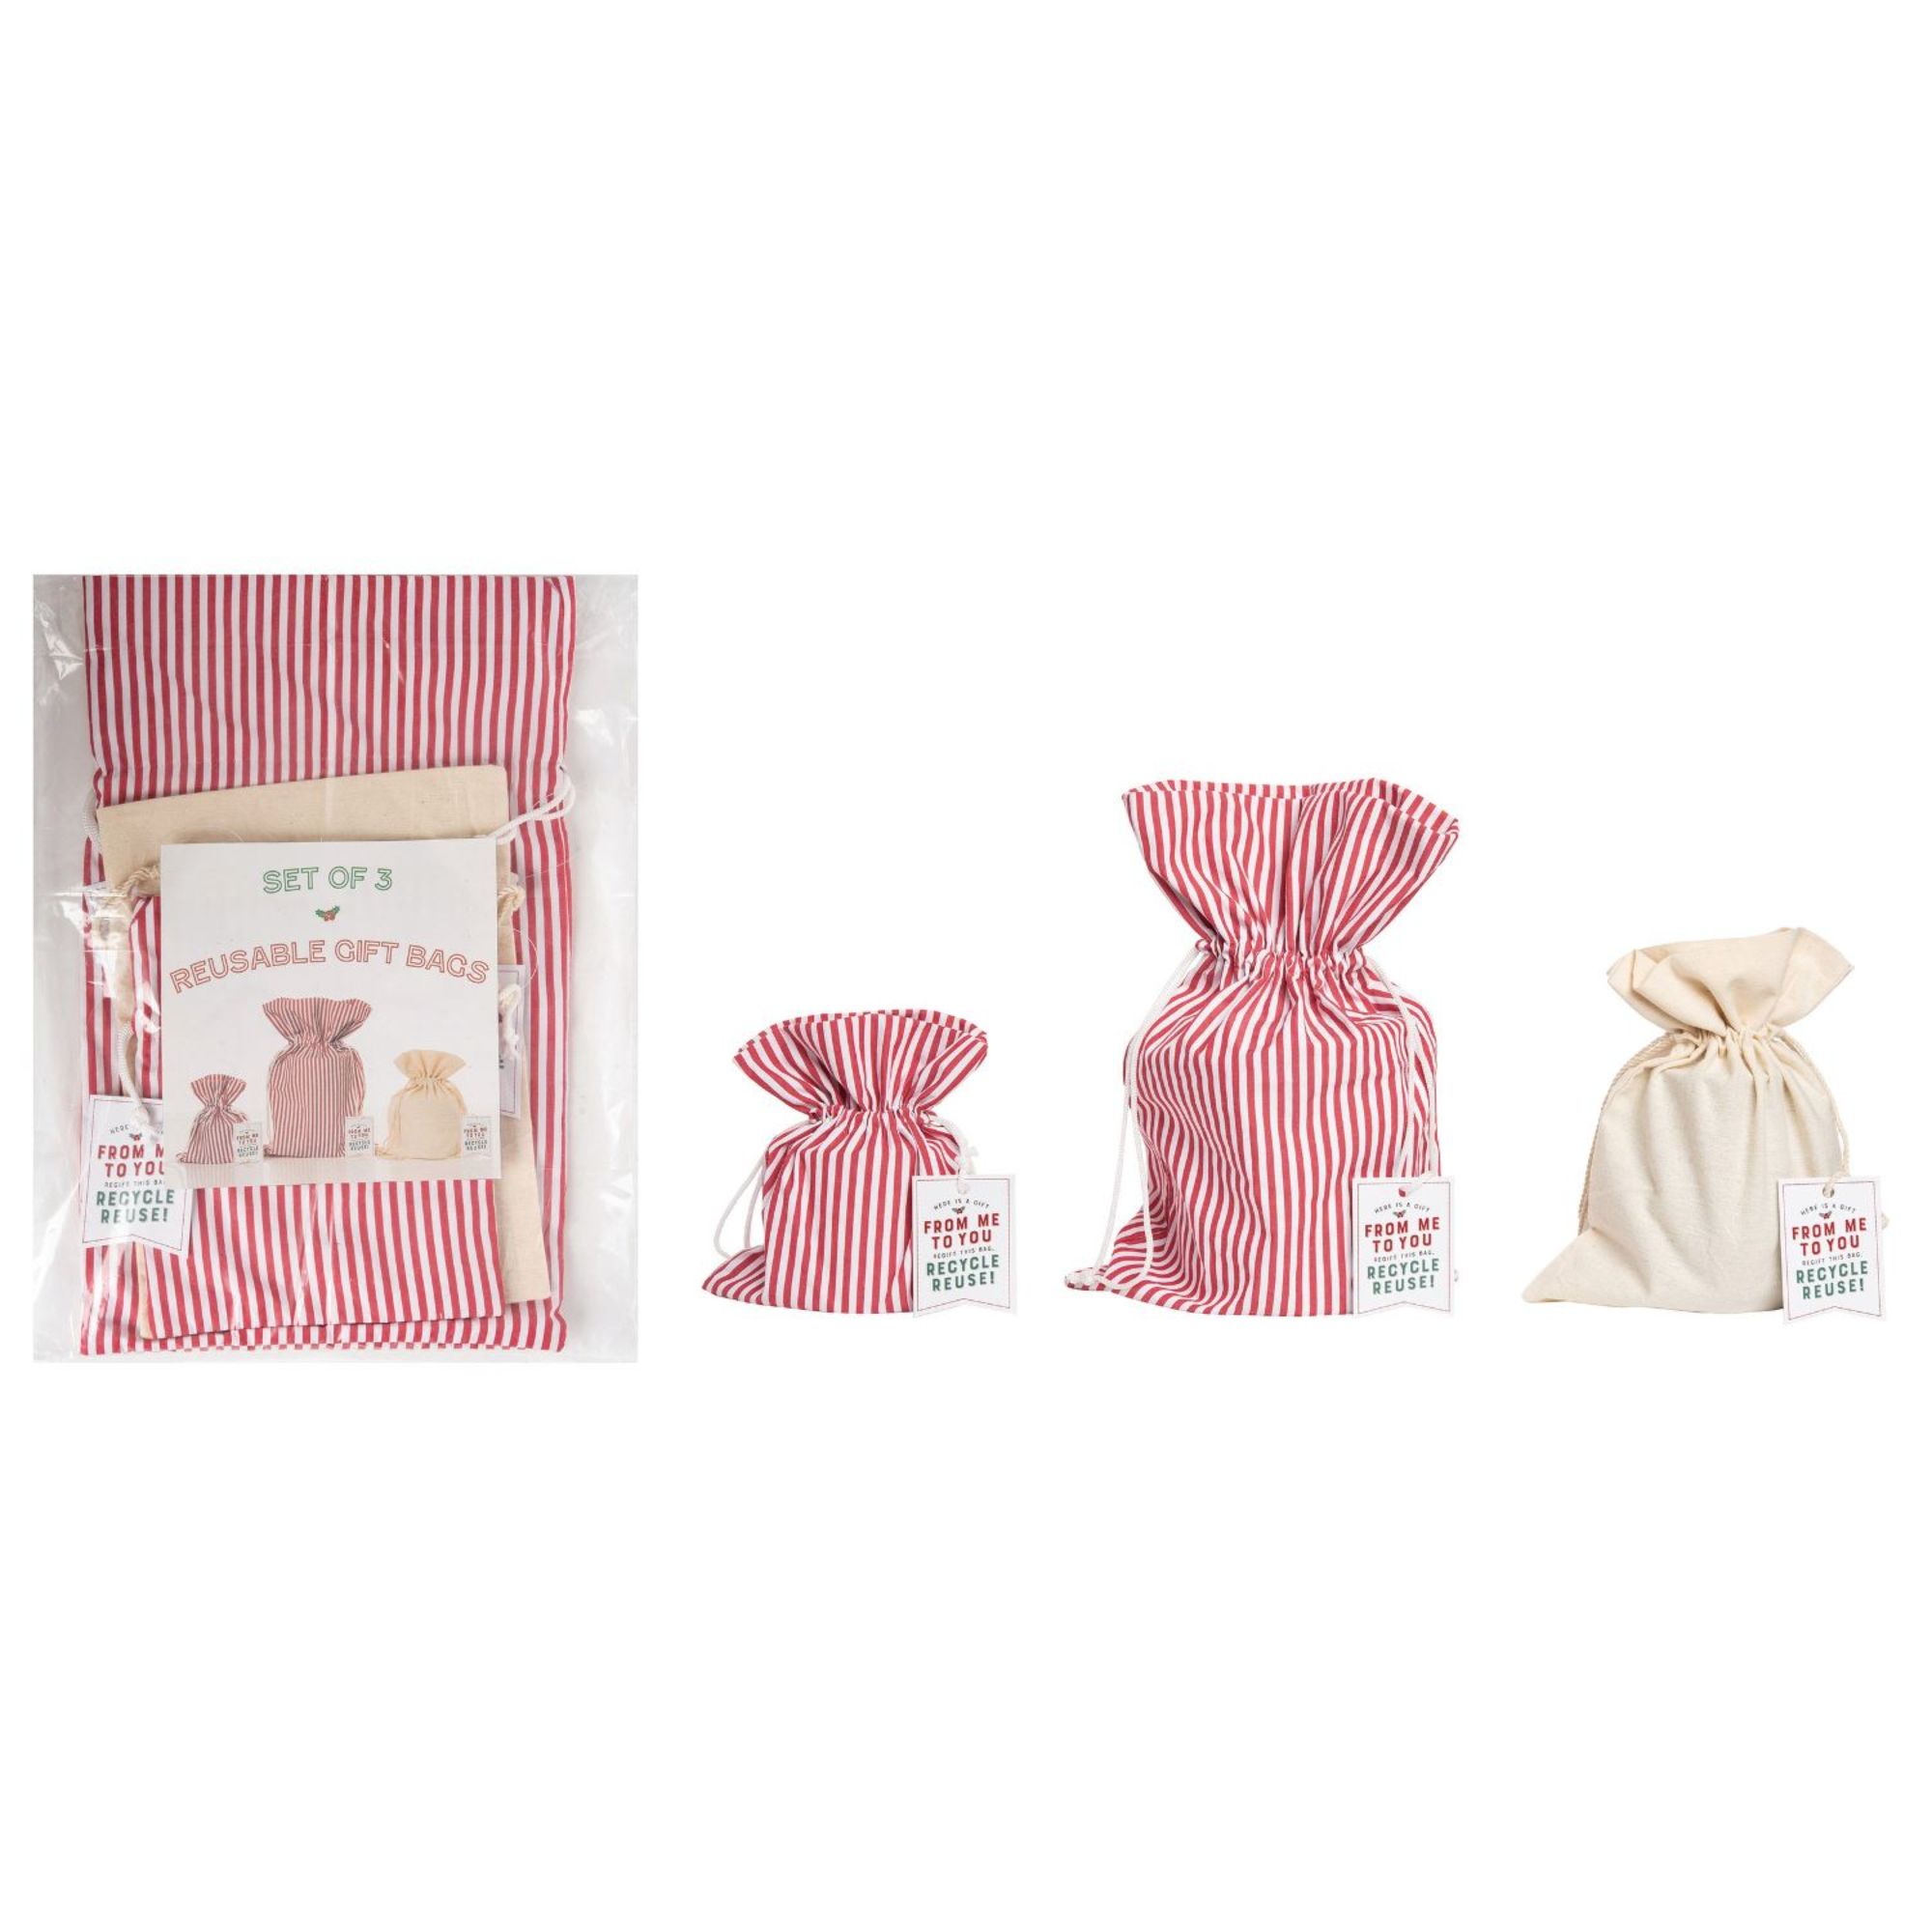 Contemporary Home Living Set of 3 Red and White Striped Reusable Christmas Gift Bags 18"